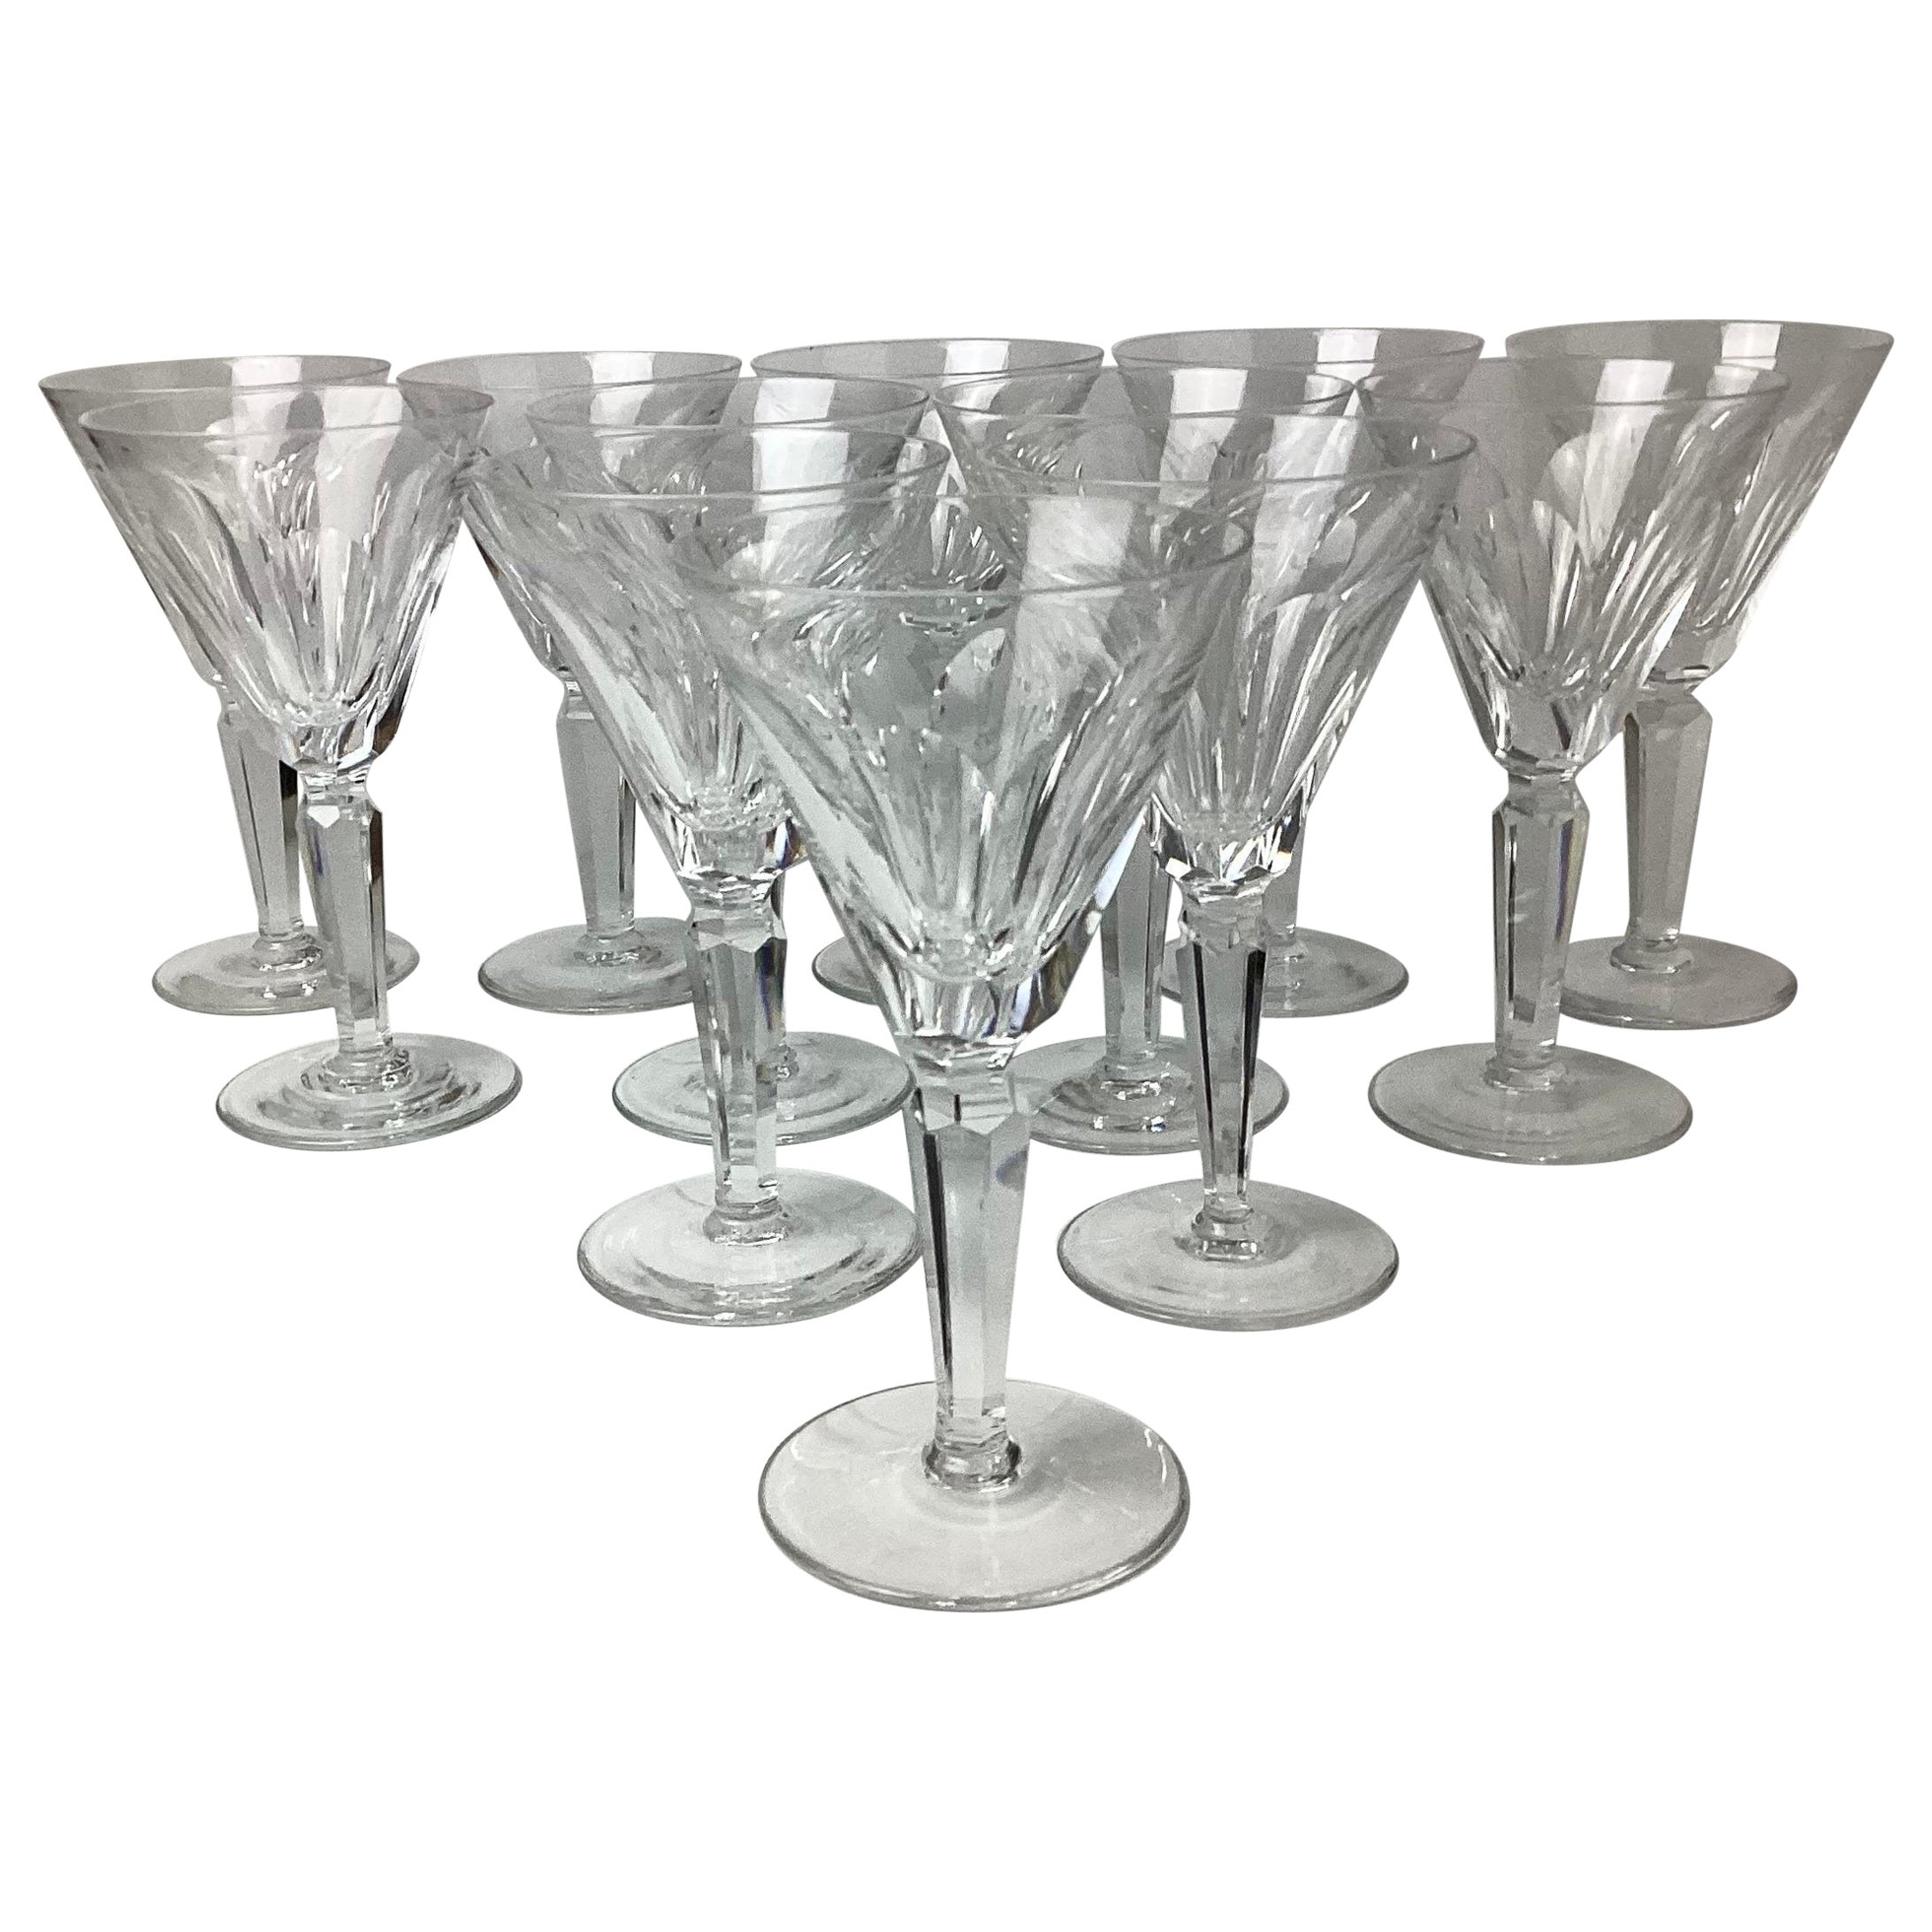 Waterford Lismore Crystal Stemmed Wine Glass - 6 inches 